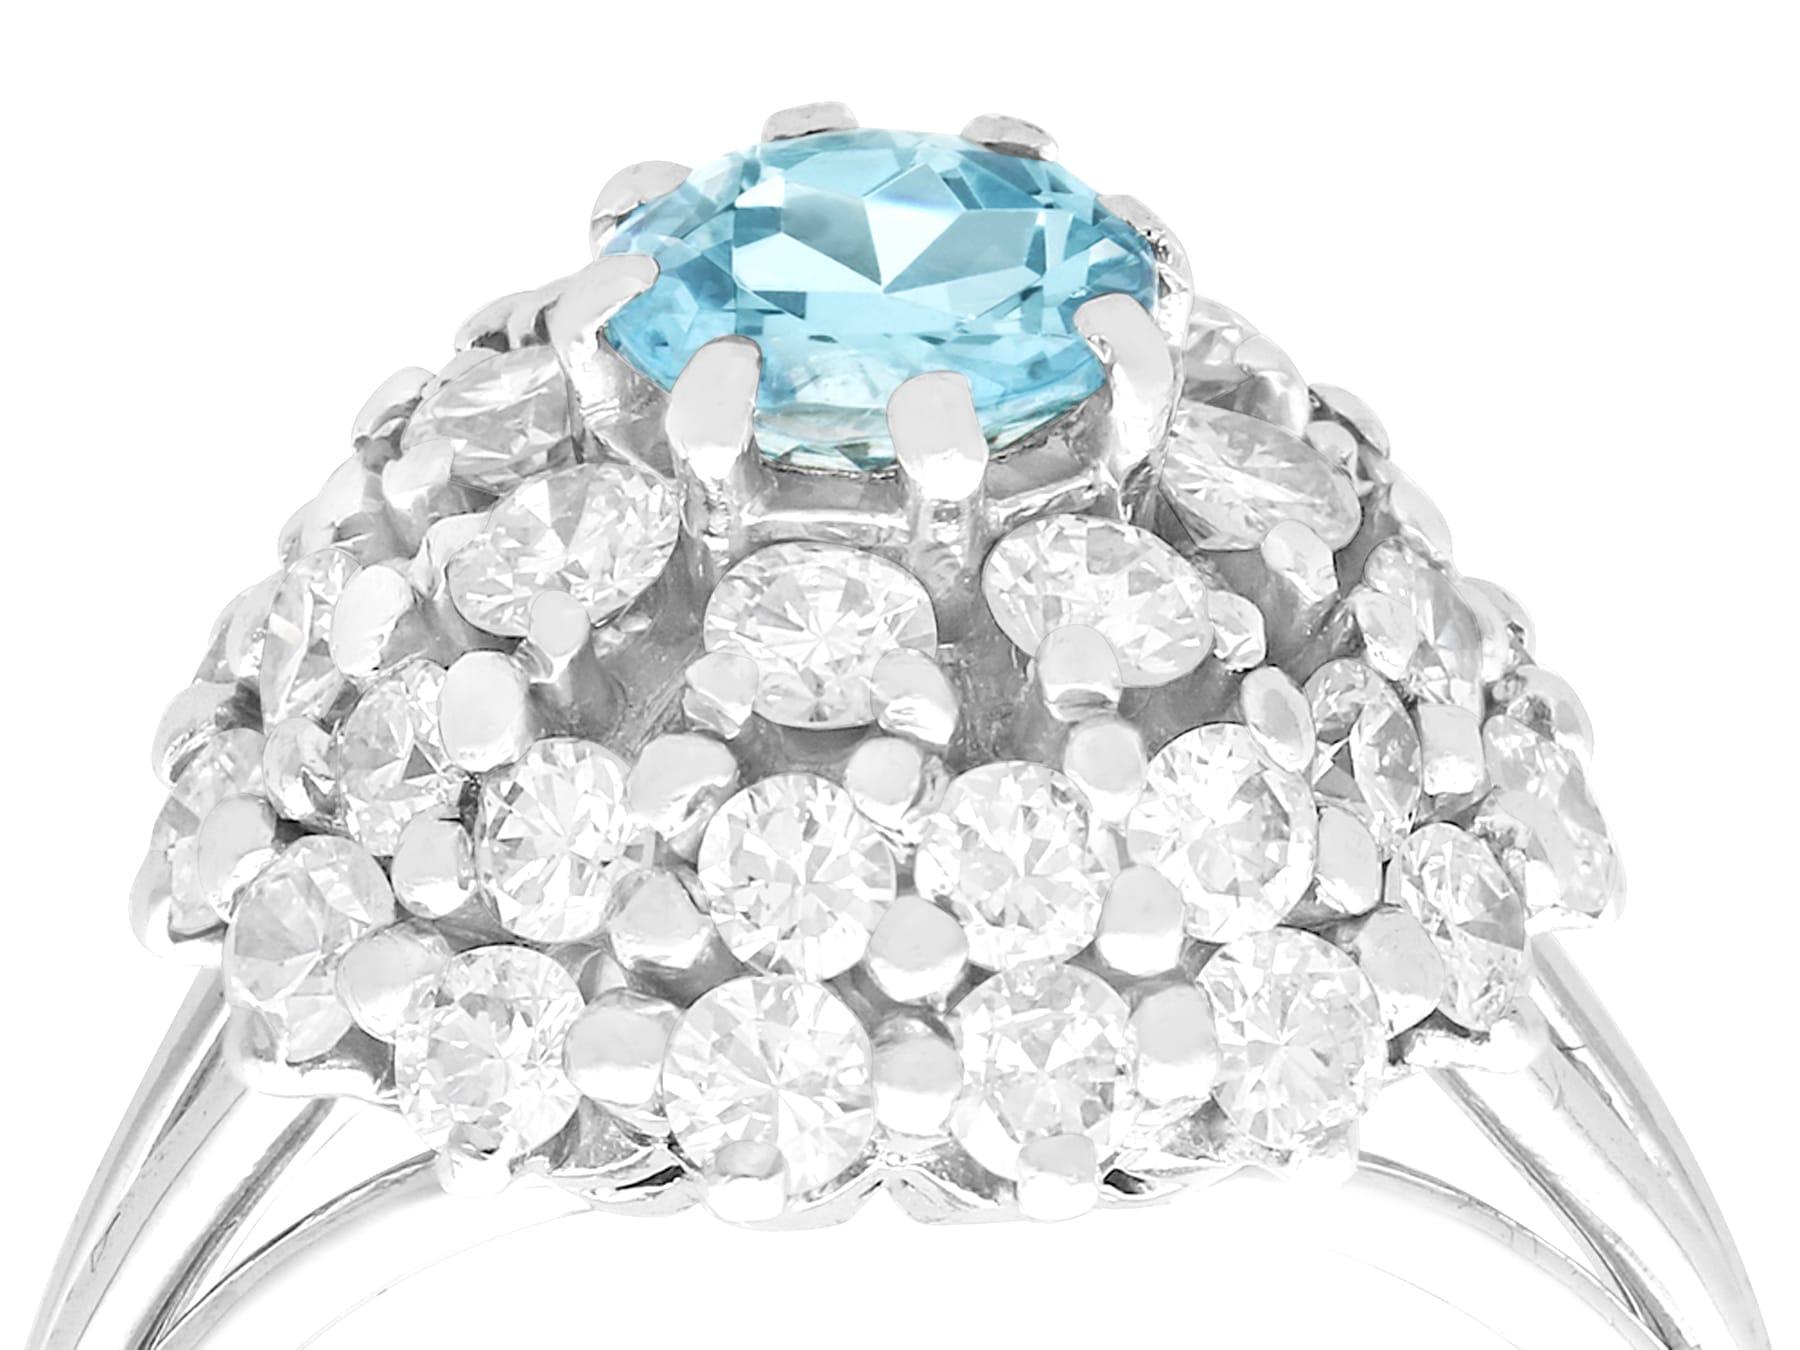 A stunning, fine and impressive vintage 0.63 carat aquamarine and 2.39 carat diamond, 18 karat white gold dress ring; part of our diverse vintage jewelry and estate jewelry collections.

This stunning, fine and impressive vintage aquamarine ring has